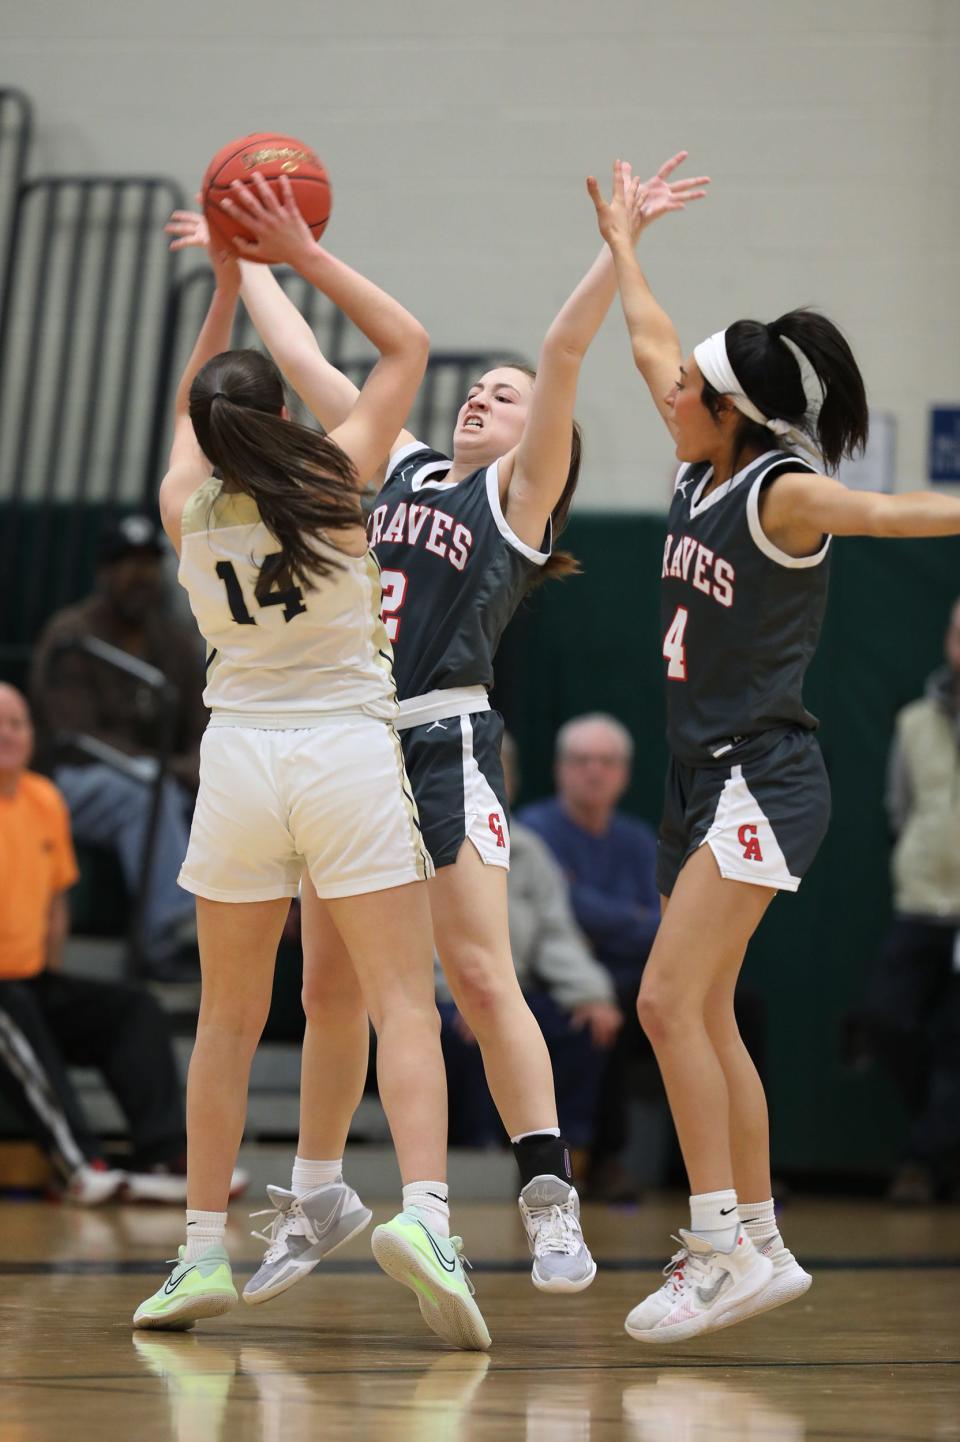 PIttsford Sutherland's Cecilia Peinado Calvo is double teamed by Canandaigua Academy's Eily Hubler and Mya Herman during first half action.